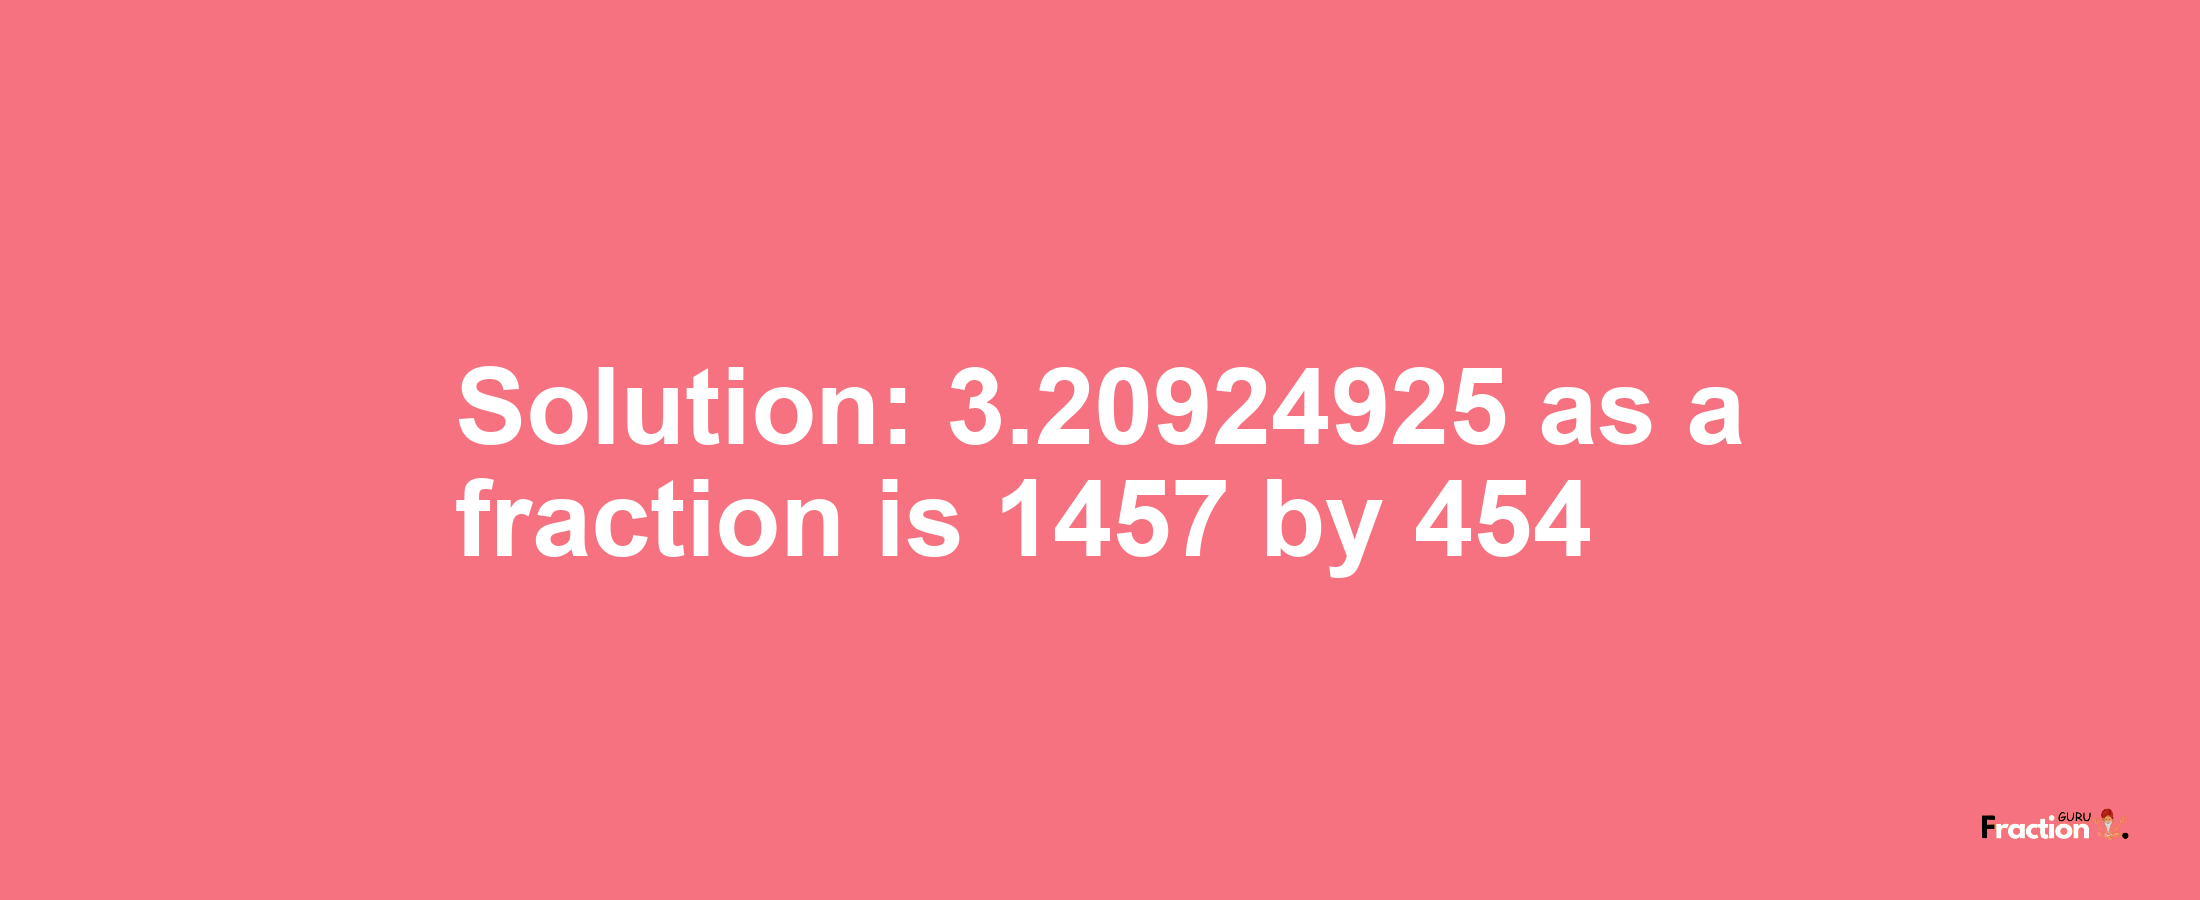 Solution:3.20924925 as a fraction is 1457/454